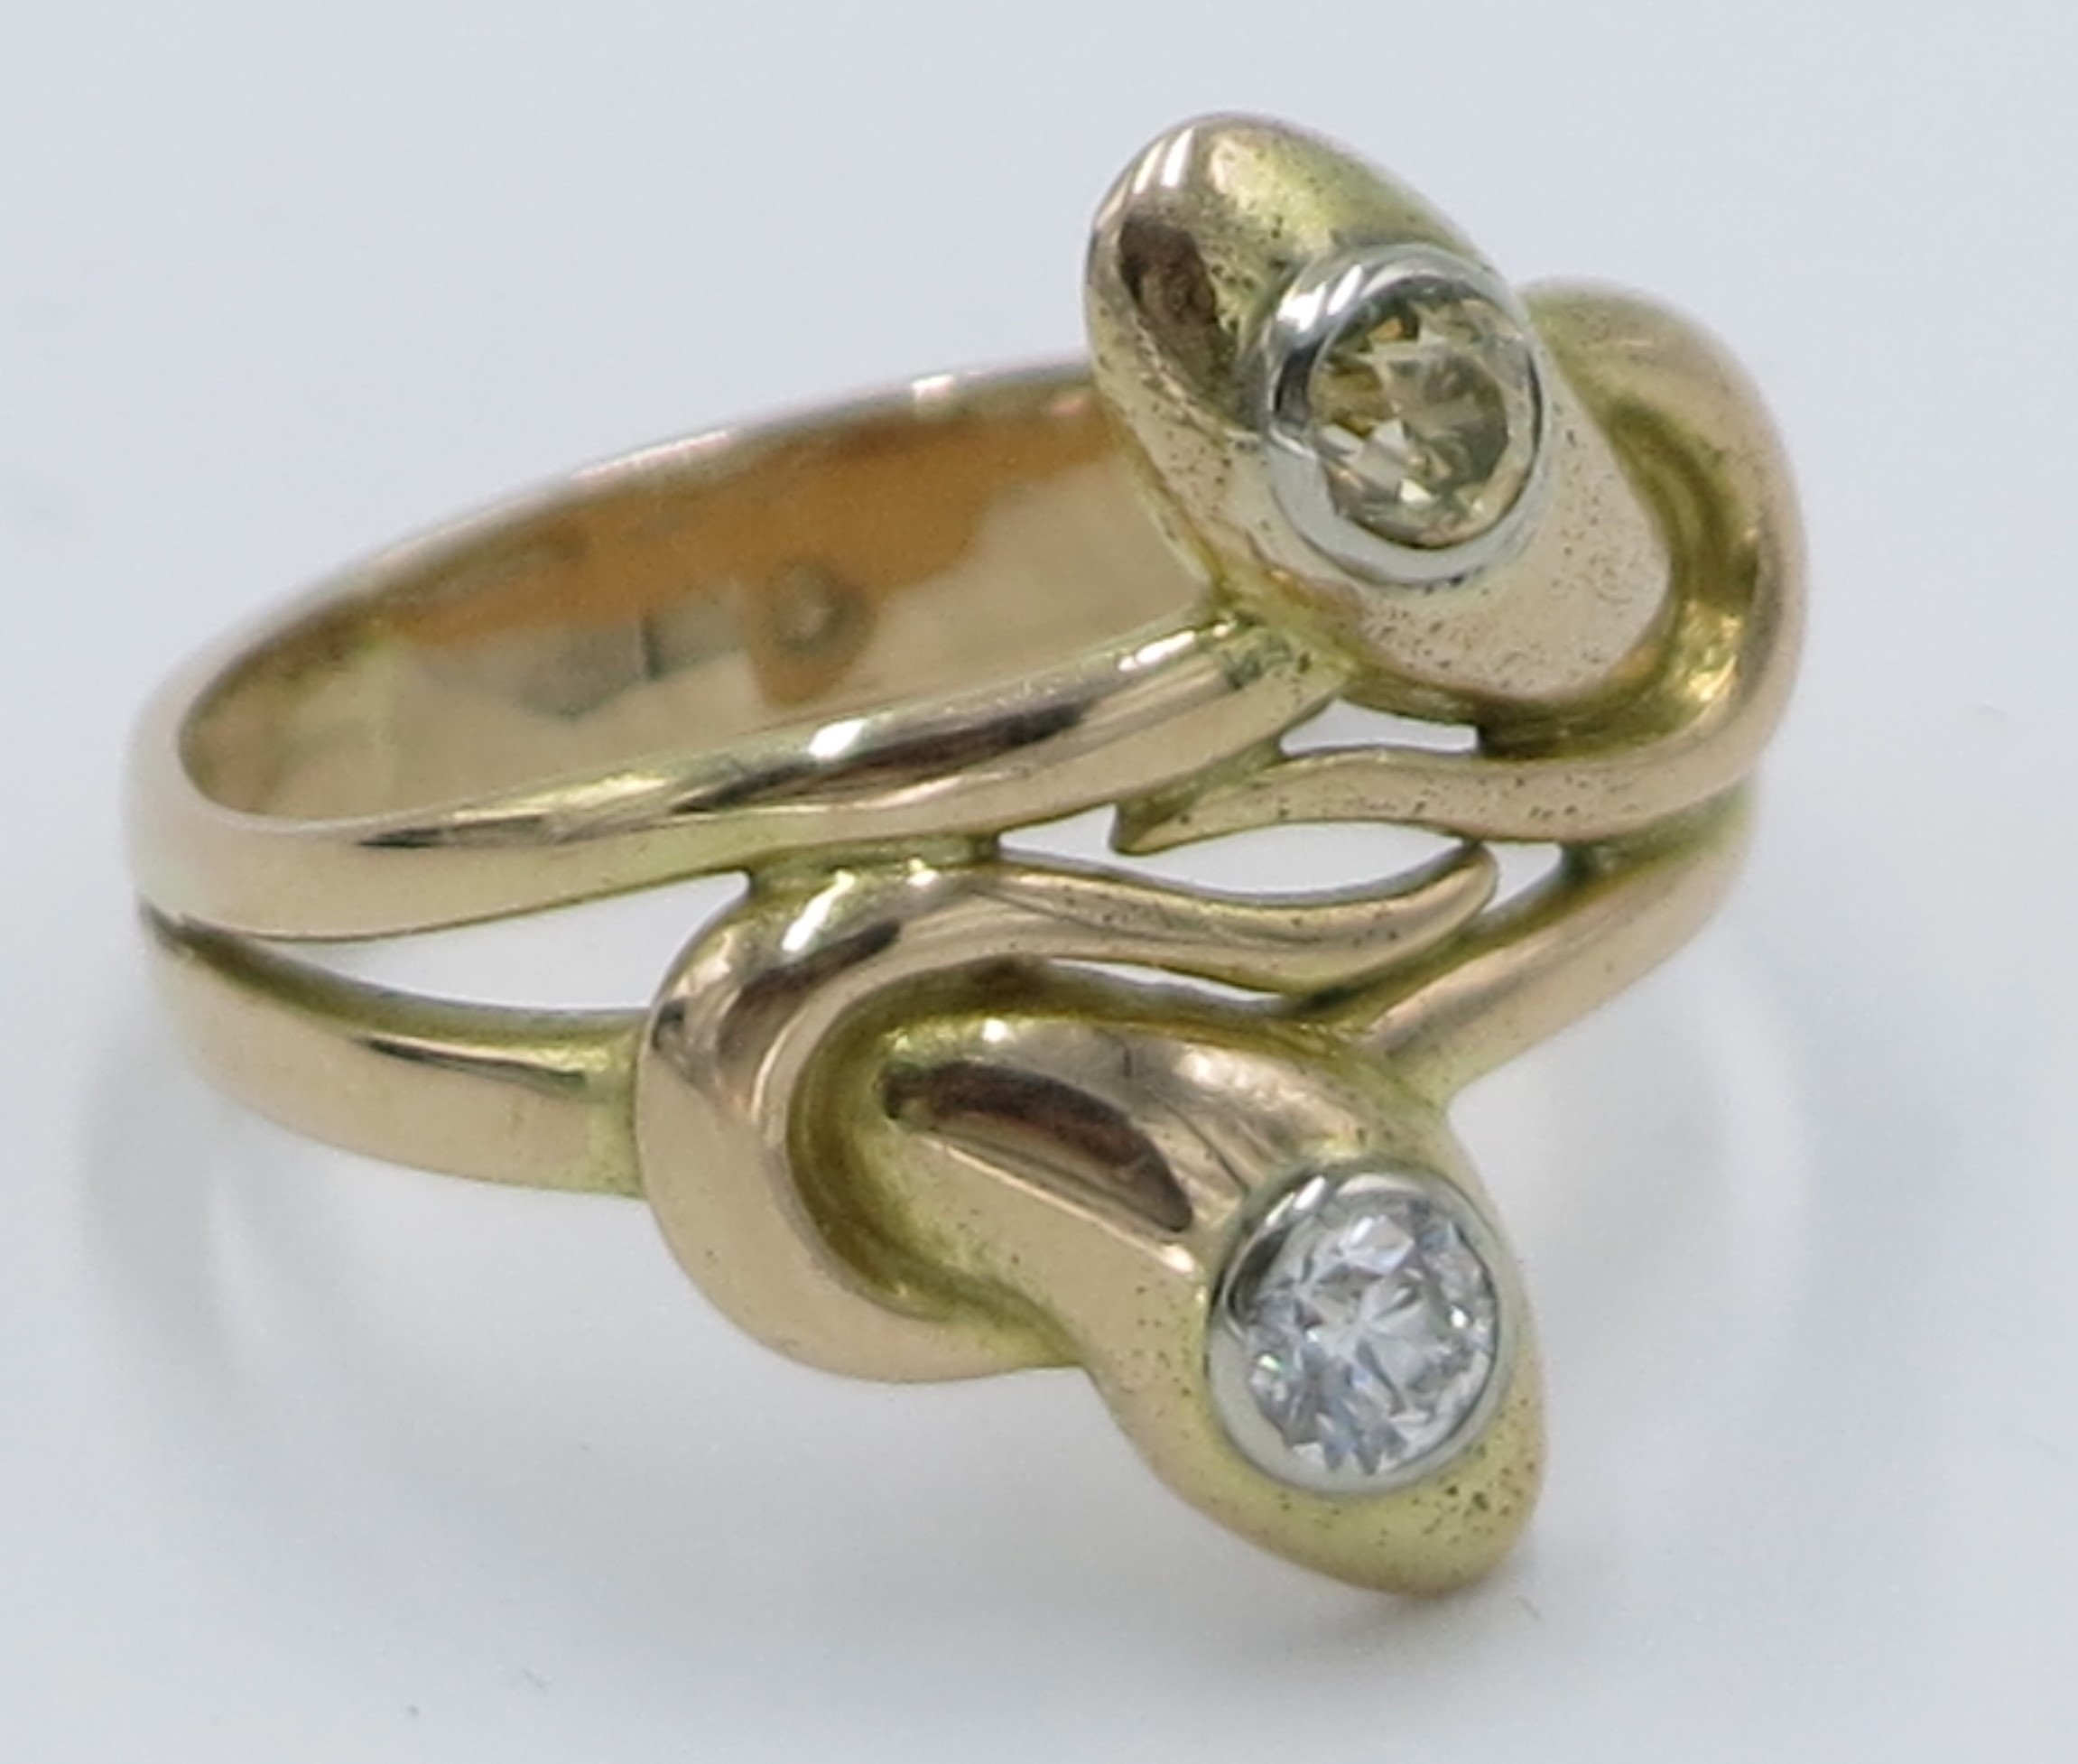 A high purity gold snake entwined ring, set with a white diamond and a yellow diamond.